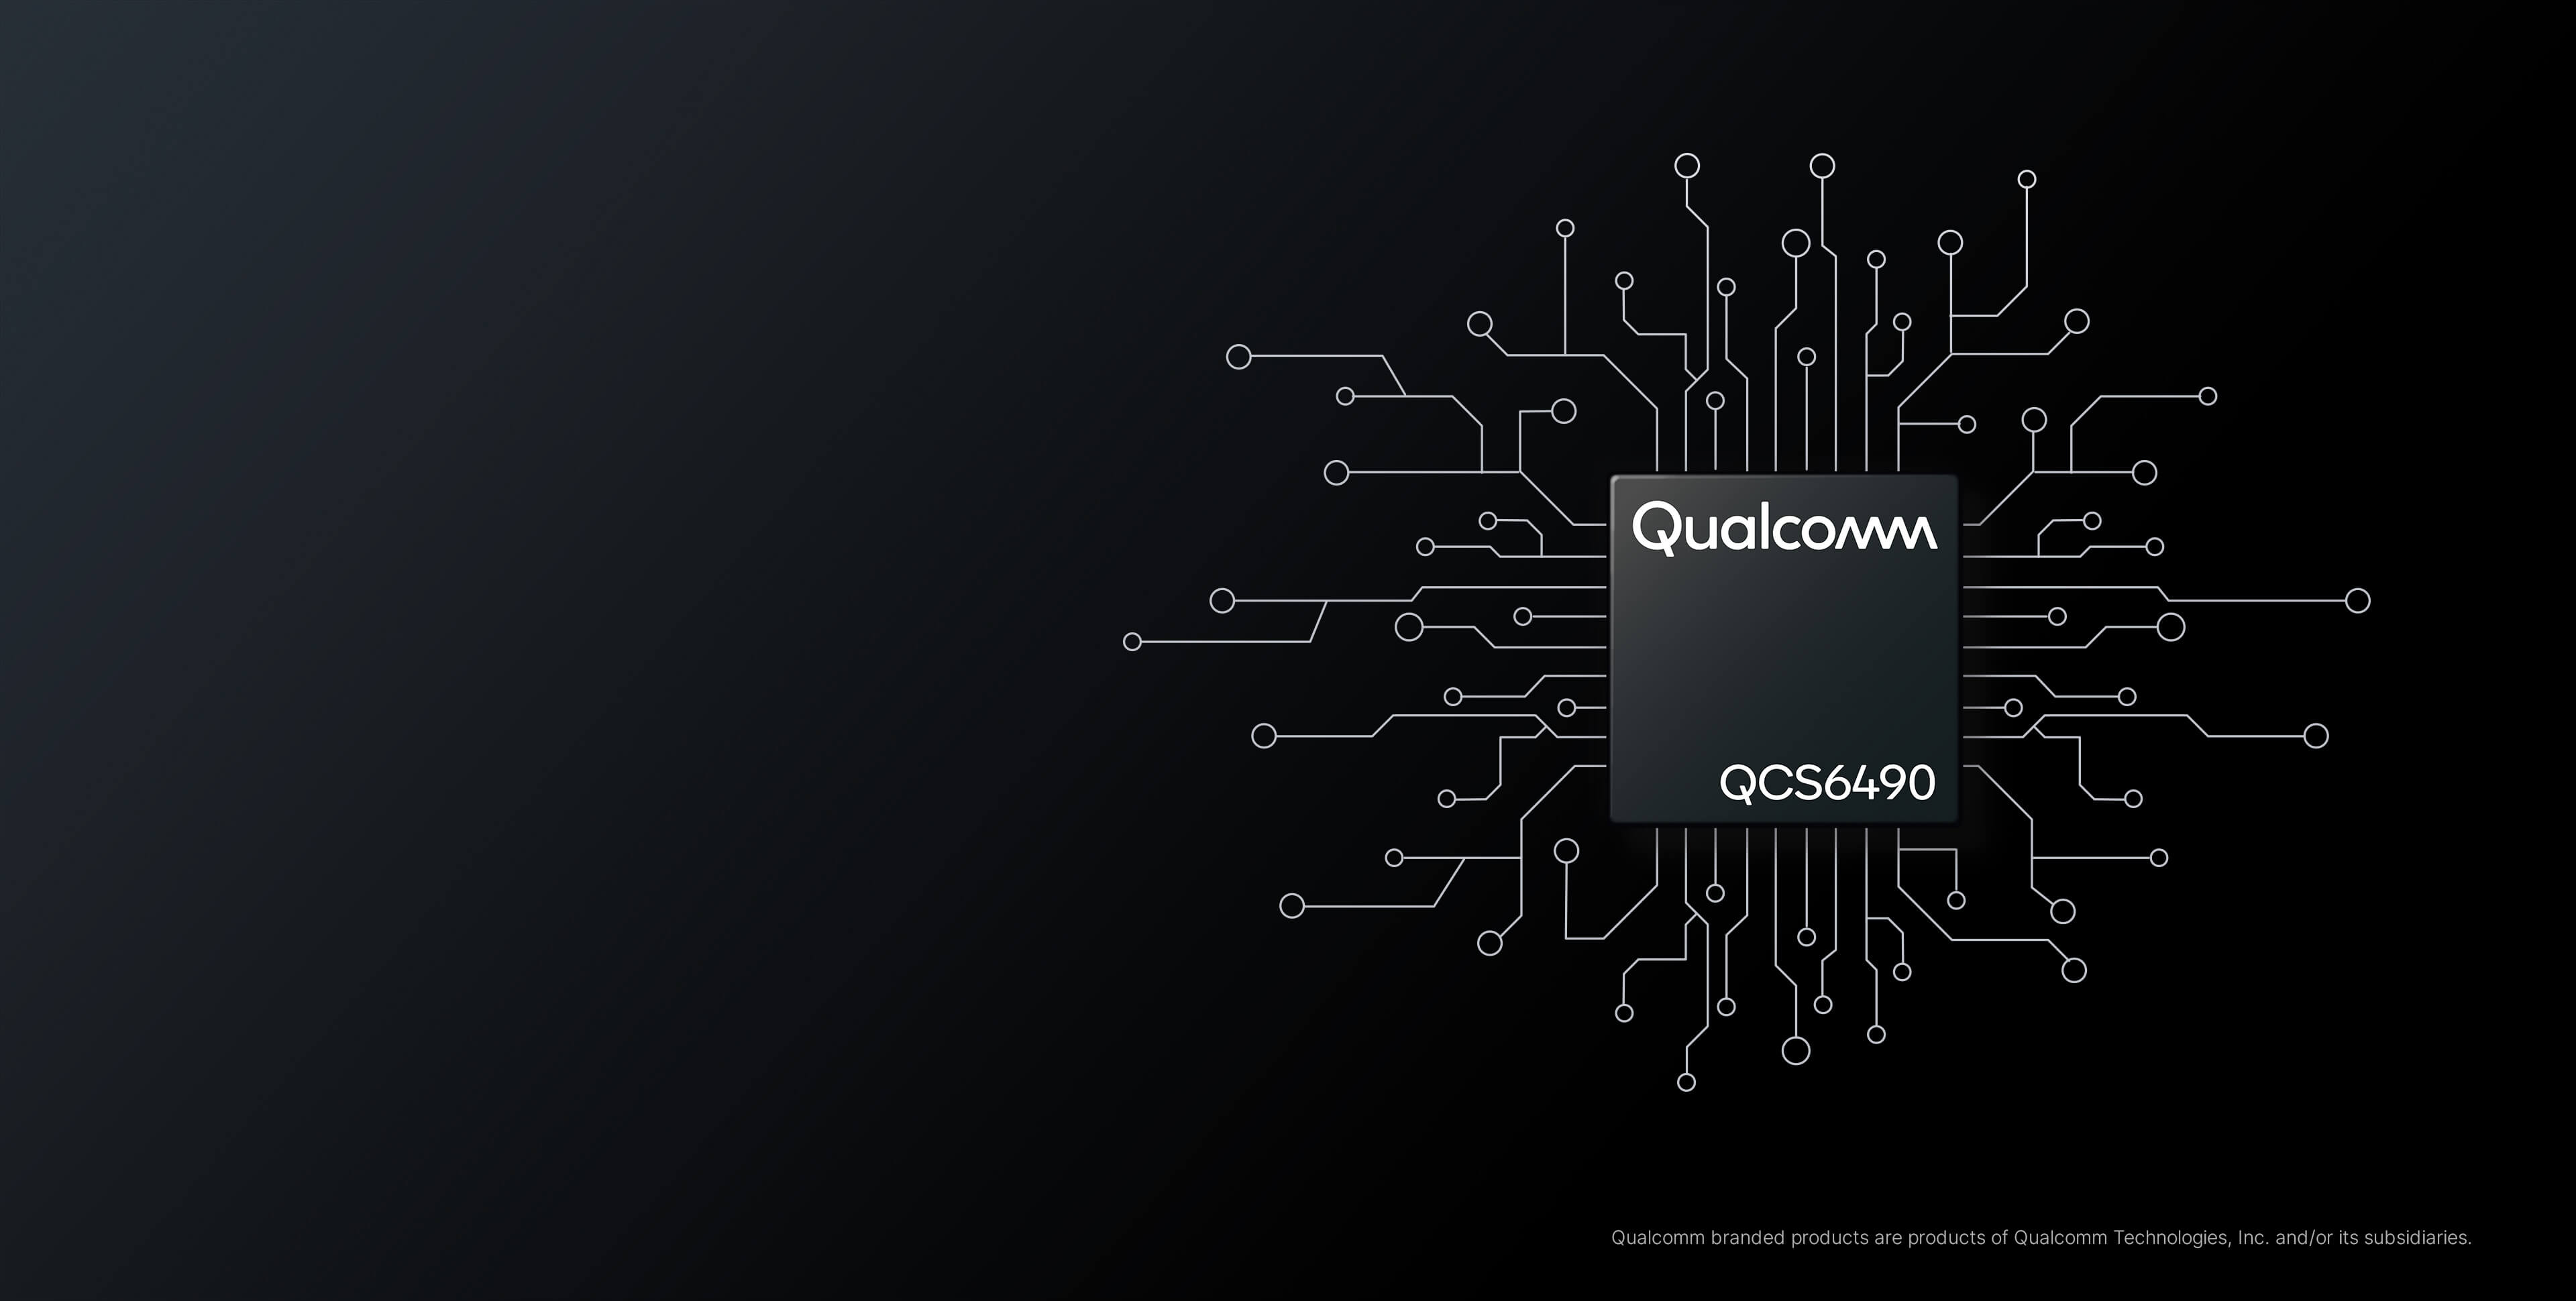 Powered by the cutting-edge Qualcomm QCS 6490